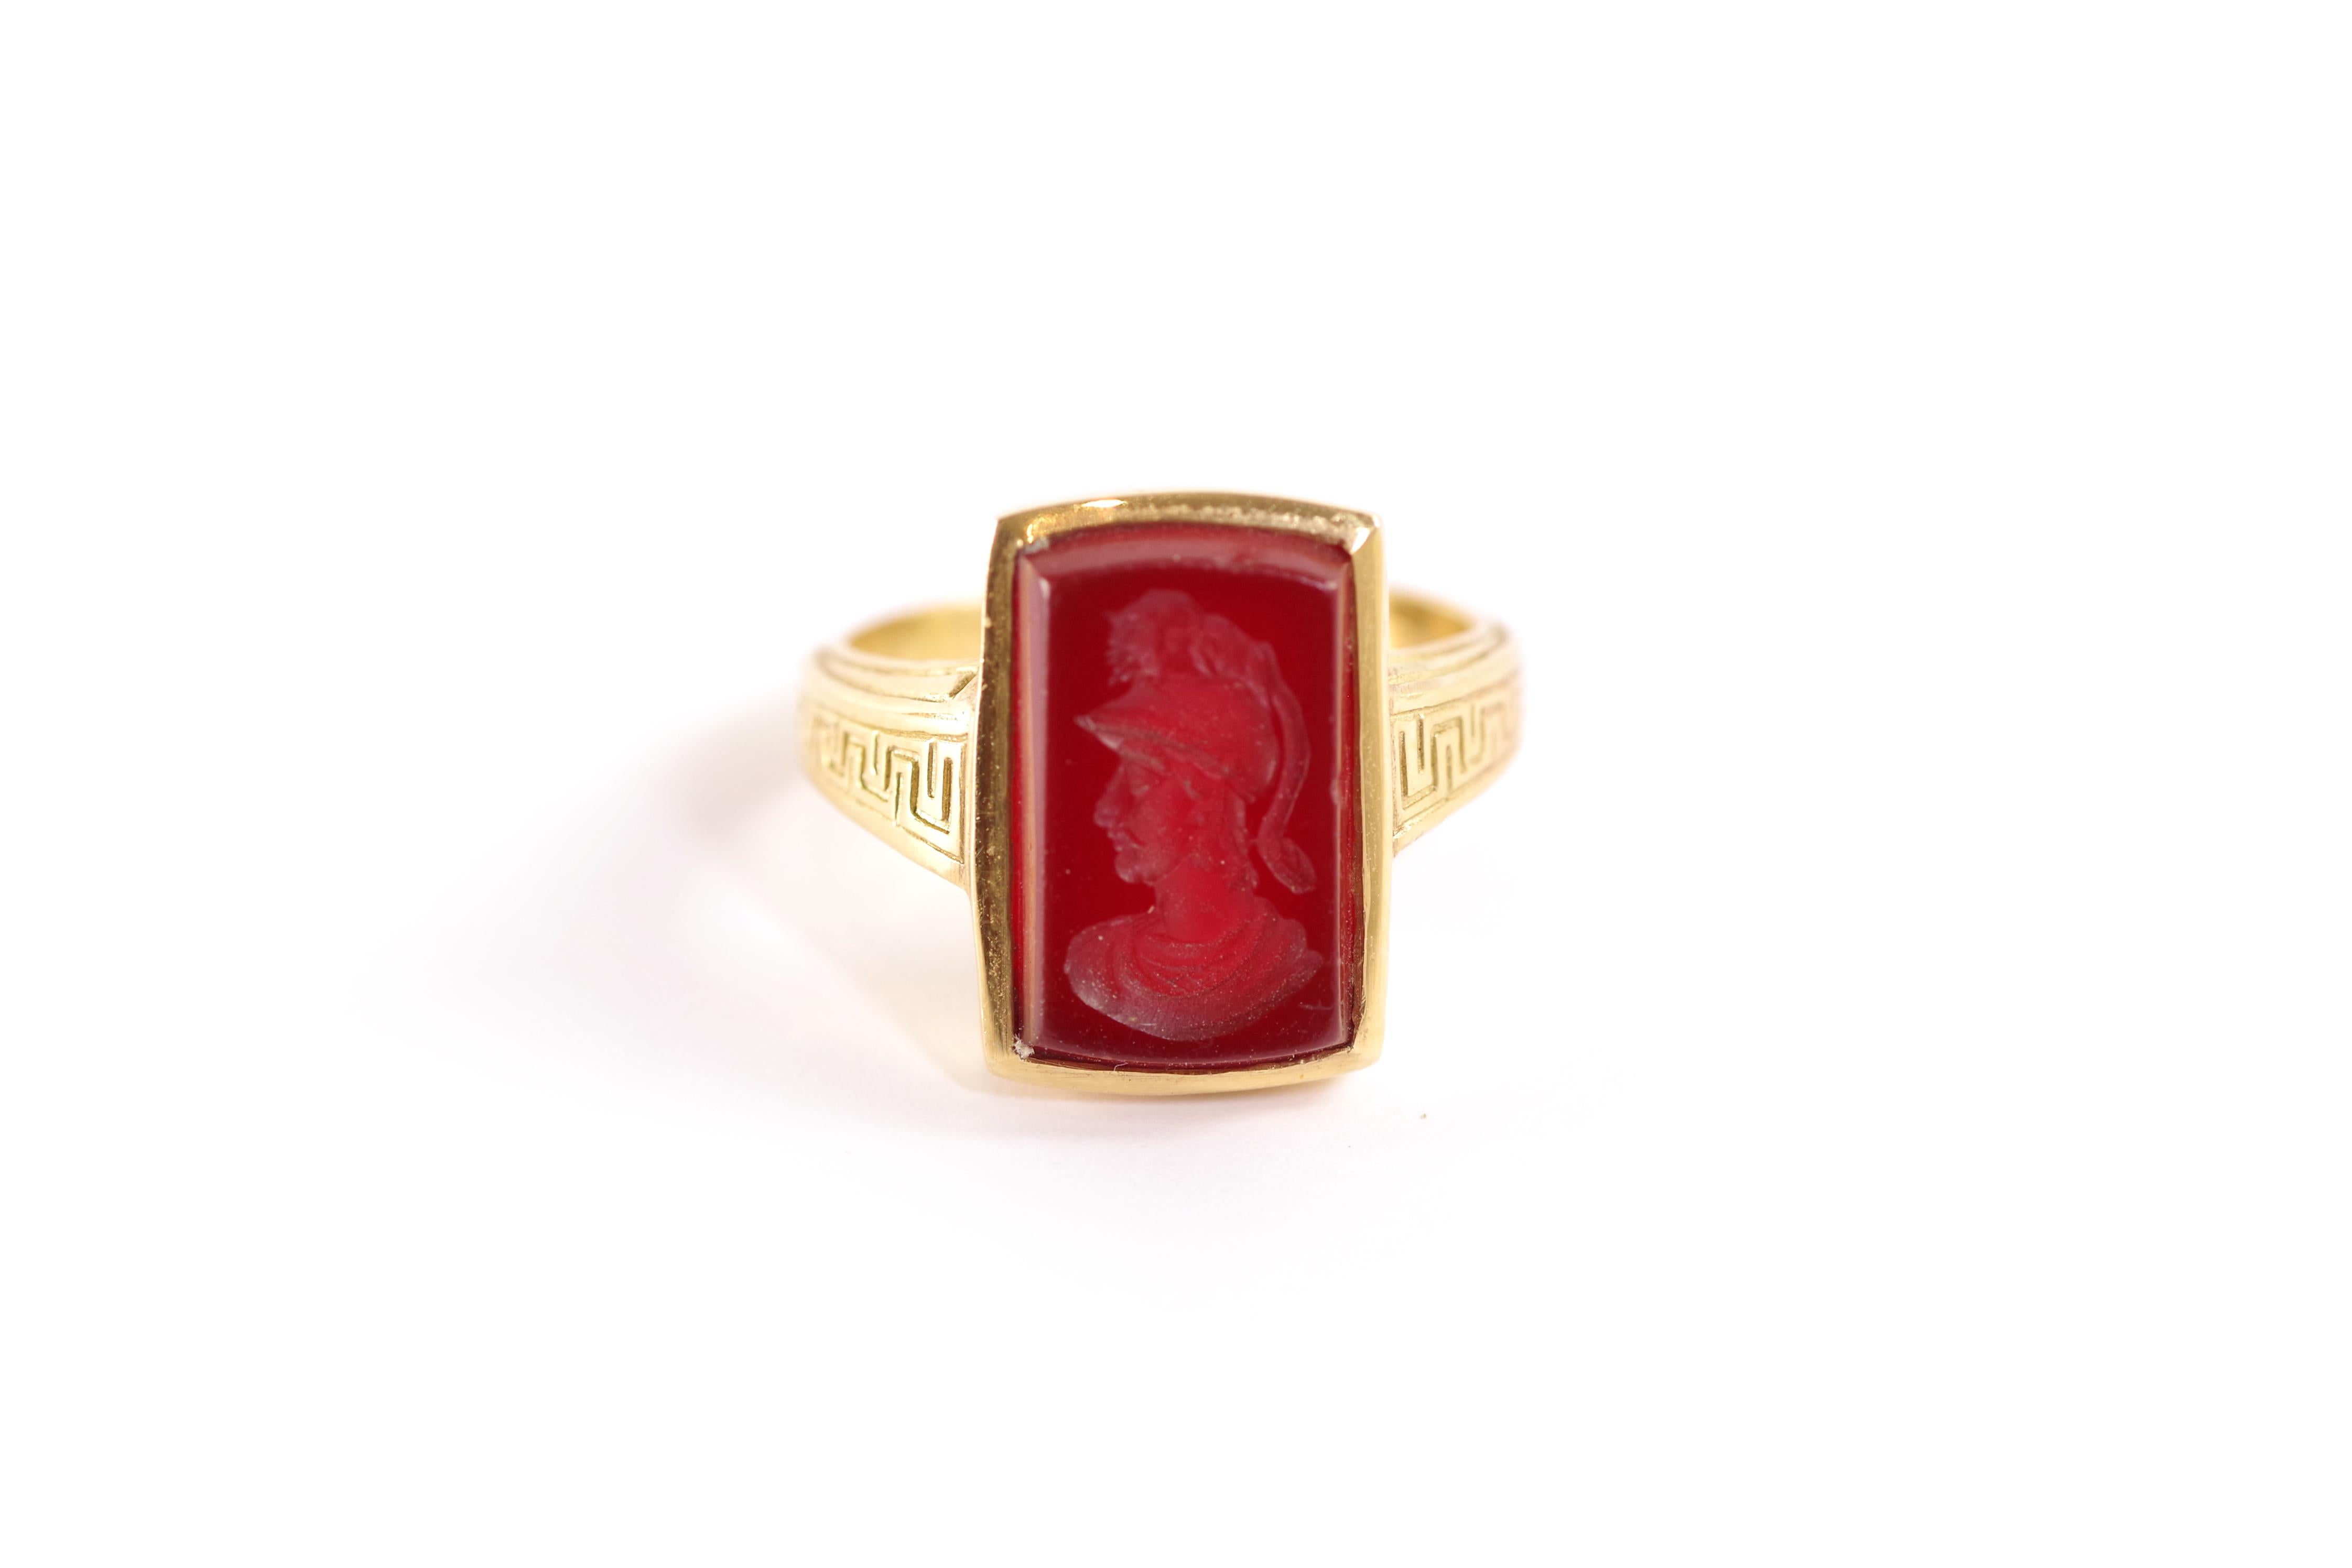 Carnelian intaglio ring in 18 karat yellow gold. Ring centred on a rectangular cornelian decorated with an intaglio depicting a Roman soldier in profile. The ring is finally decorated with Greek frieze on the shoulders. Vintage ring, circa 1990,